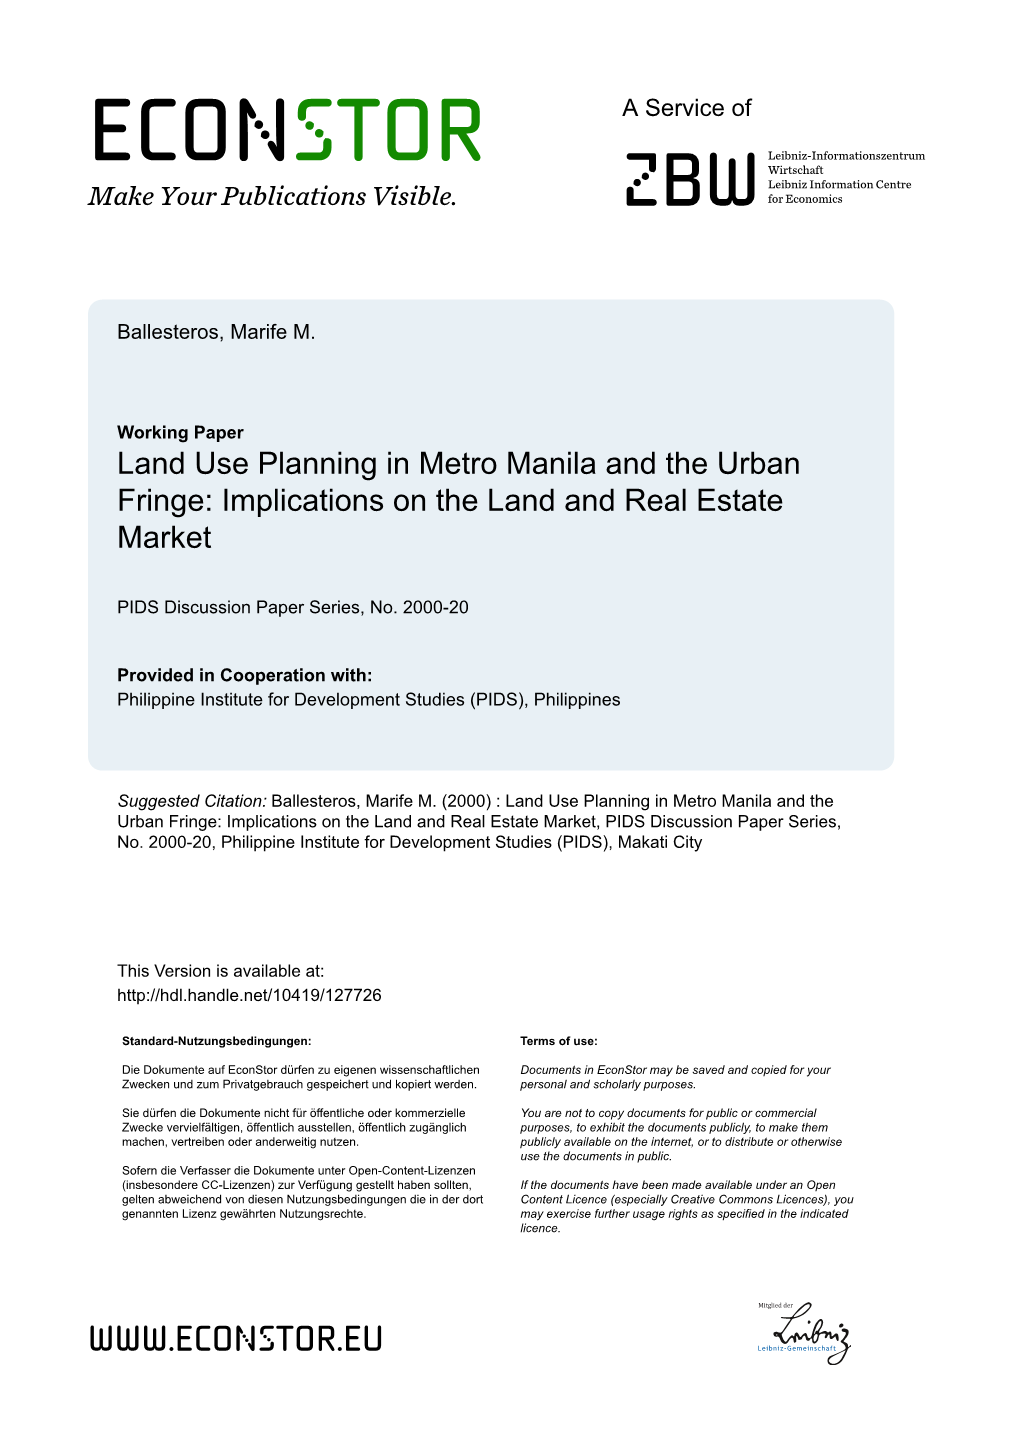 Land Use Planning in Metro Manila and the Urban Fringe: Implications on the Land and Real Estate Market